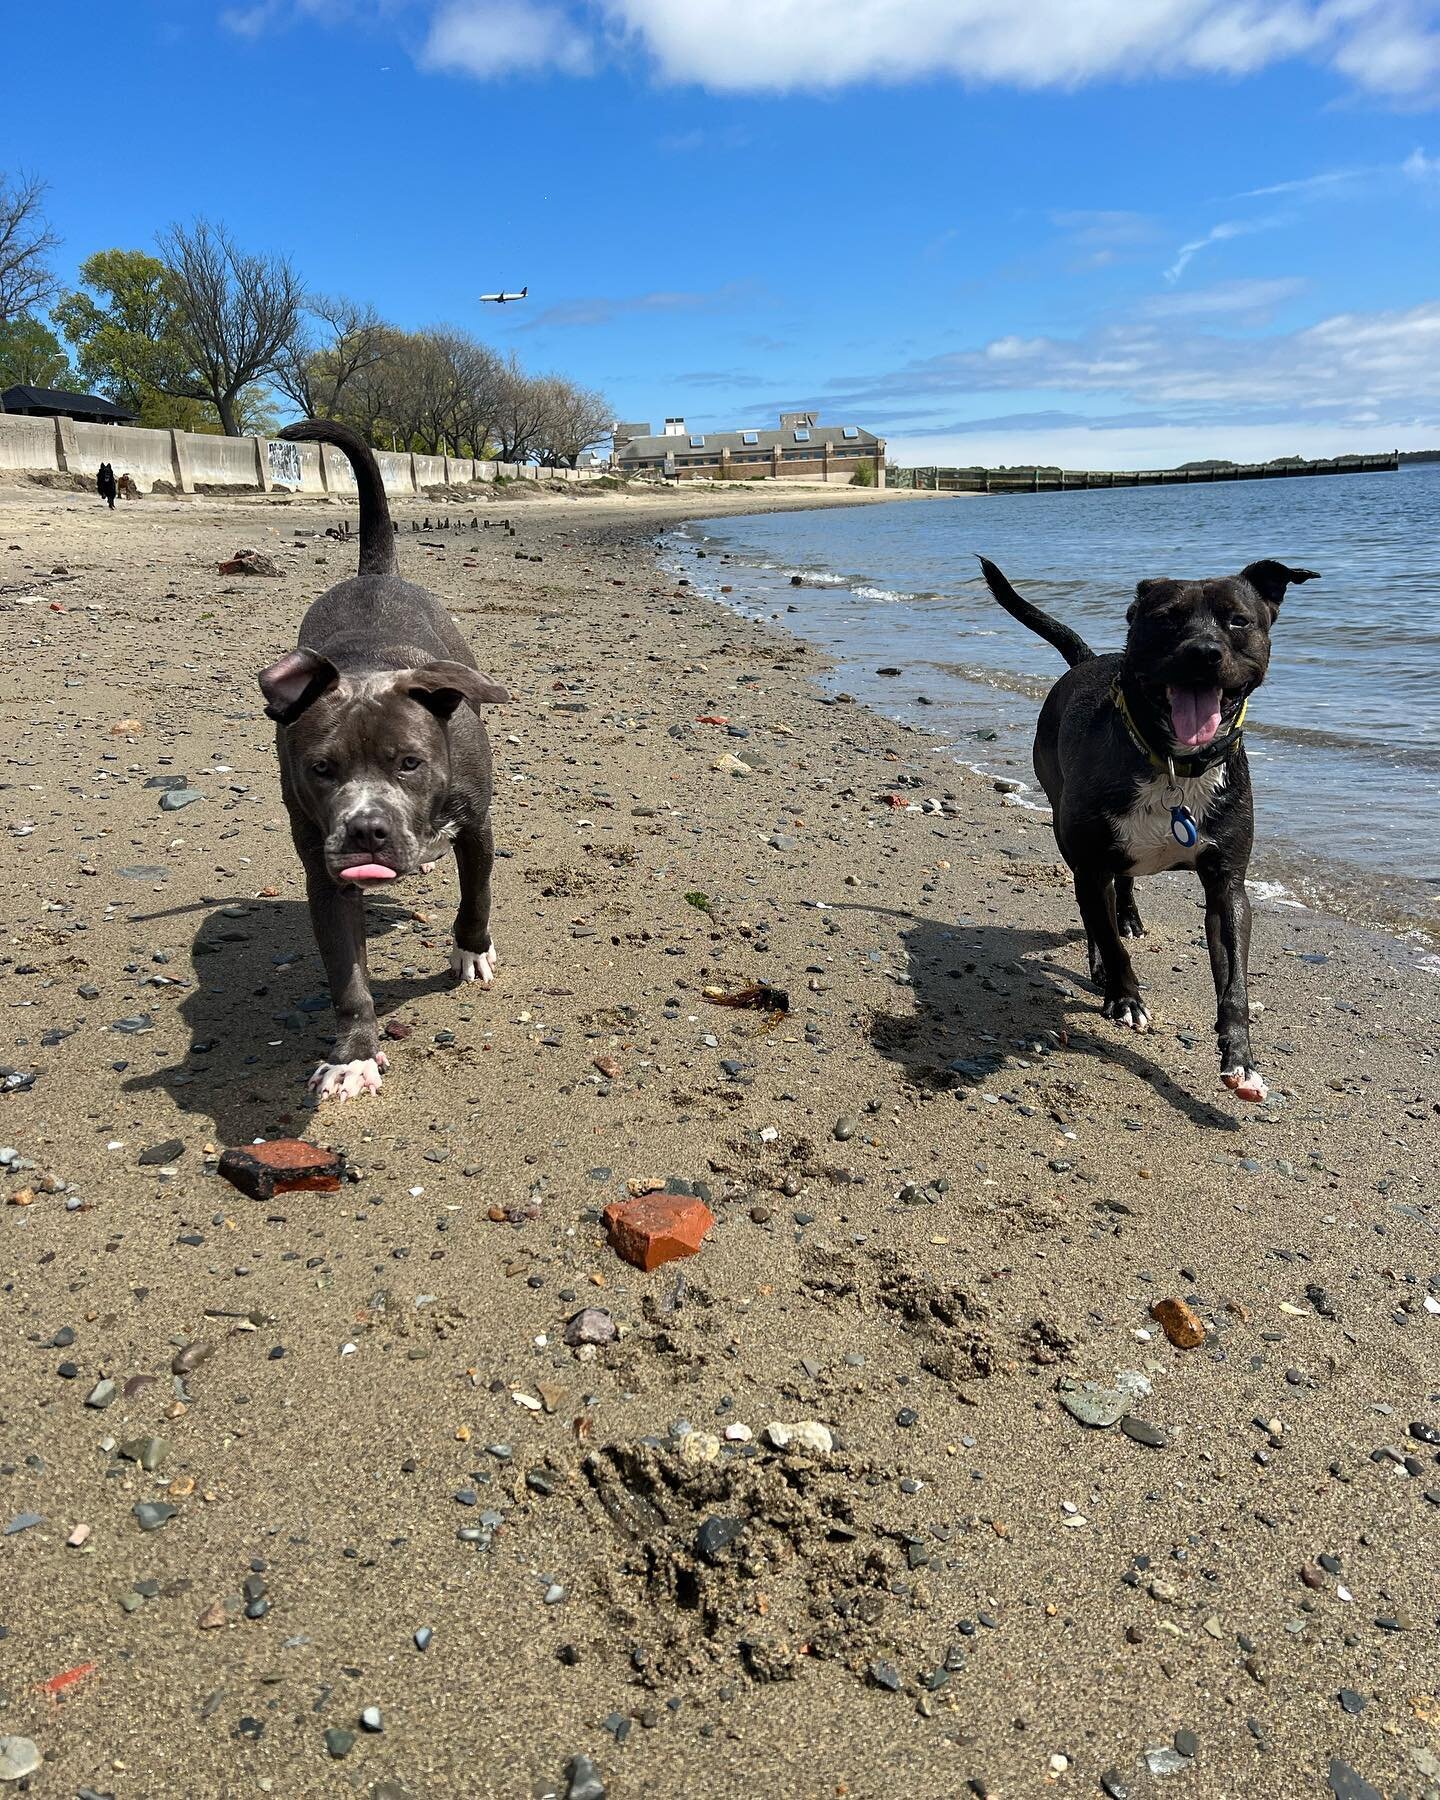 Lots of Friday Feels today! 🐾 🌊 🐾 #friday #fridayfeels #beachdays #southie #southiedogs #boston #bostondogs